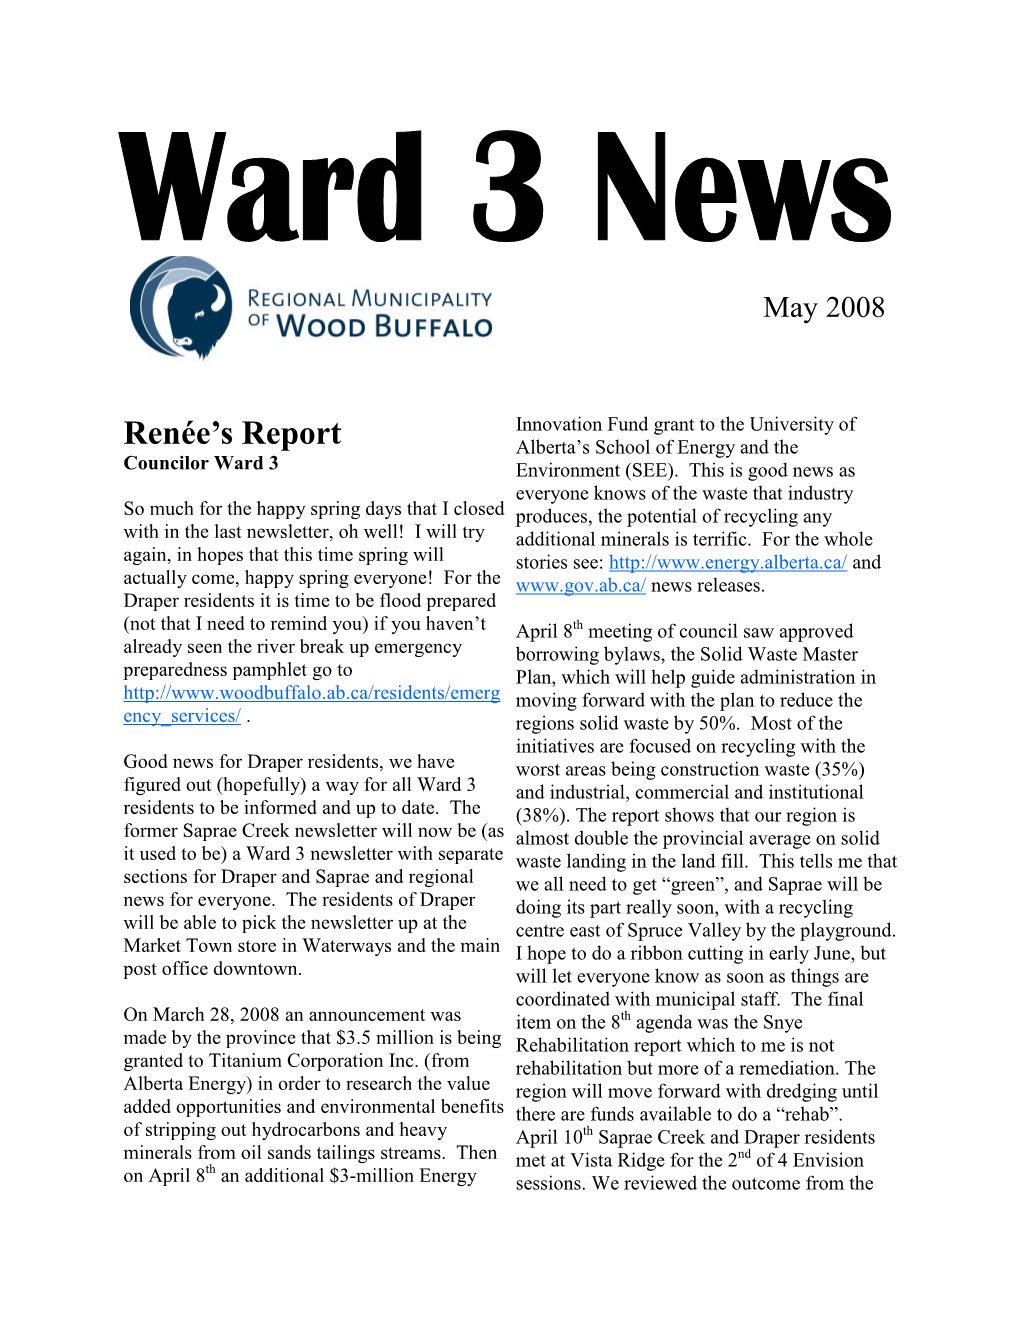 Ward 3 Newsletter with Separate Waste Landing in the Land Fill